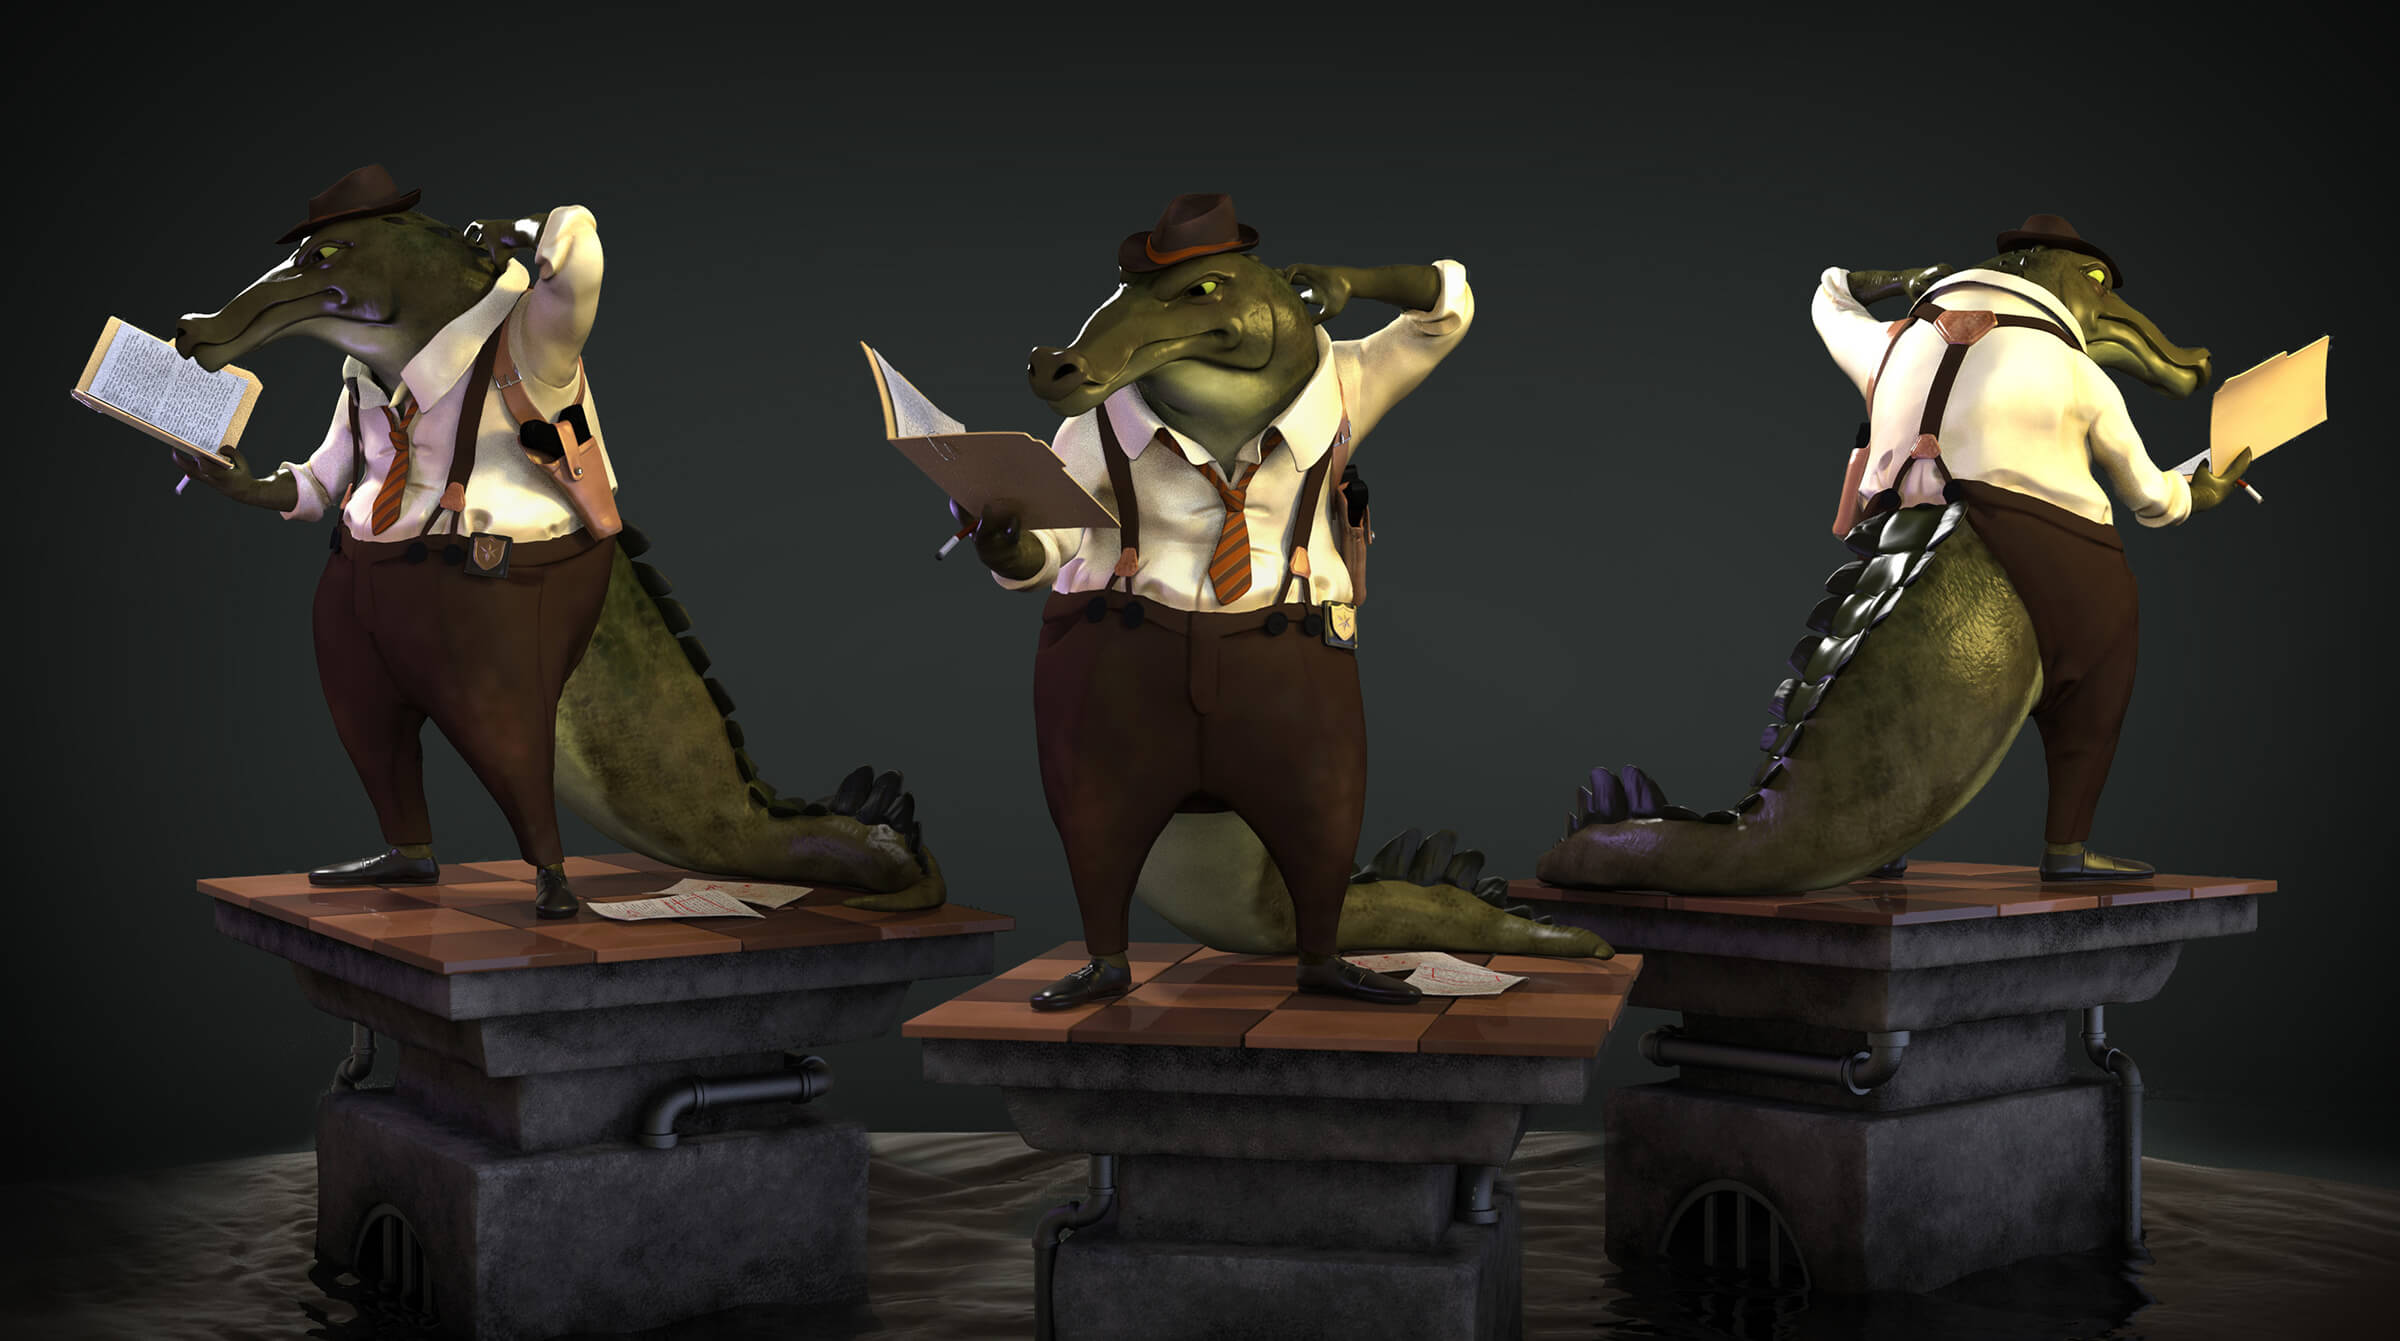 Three angles of an alligator dressed in pants, shirt, and tie